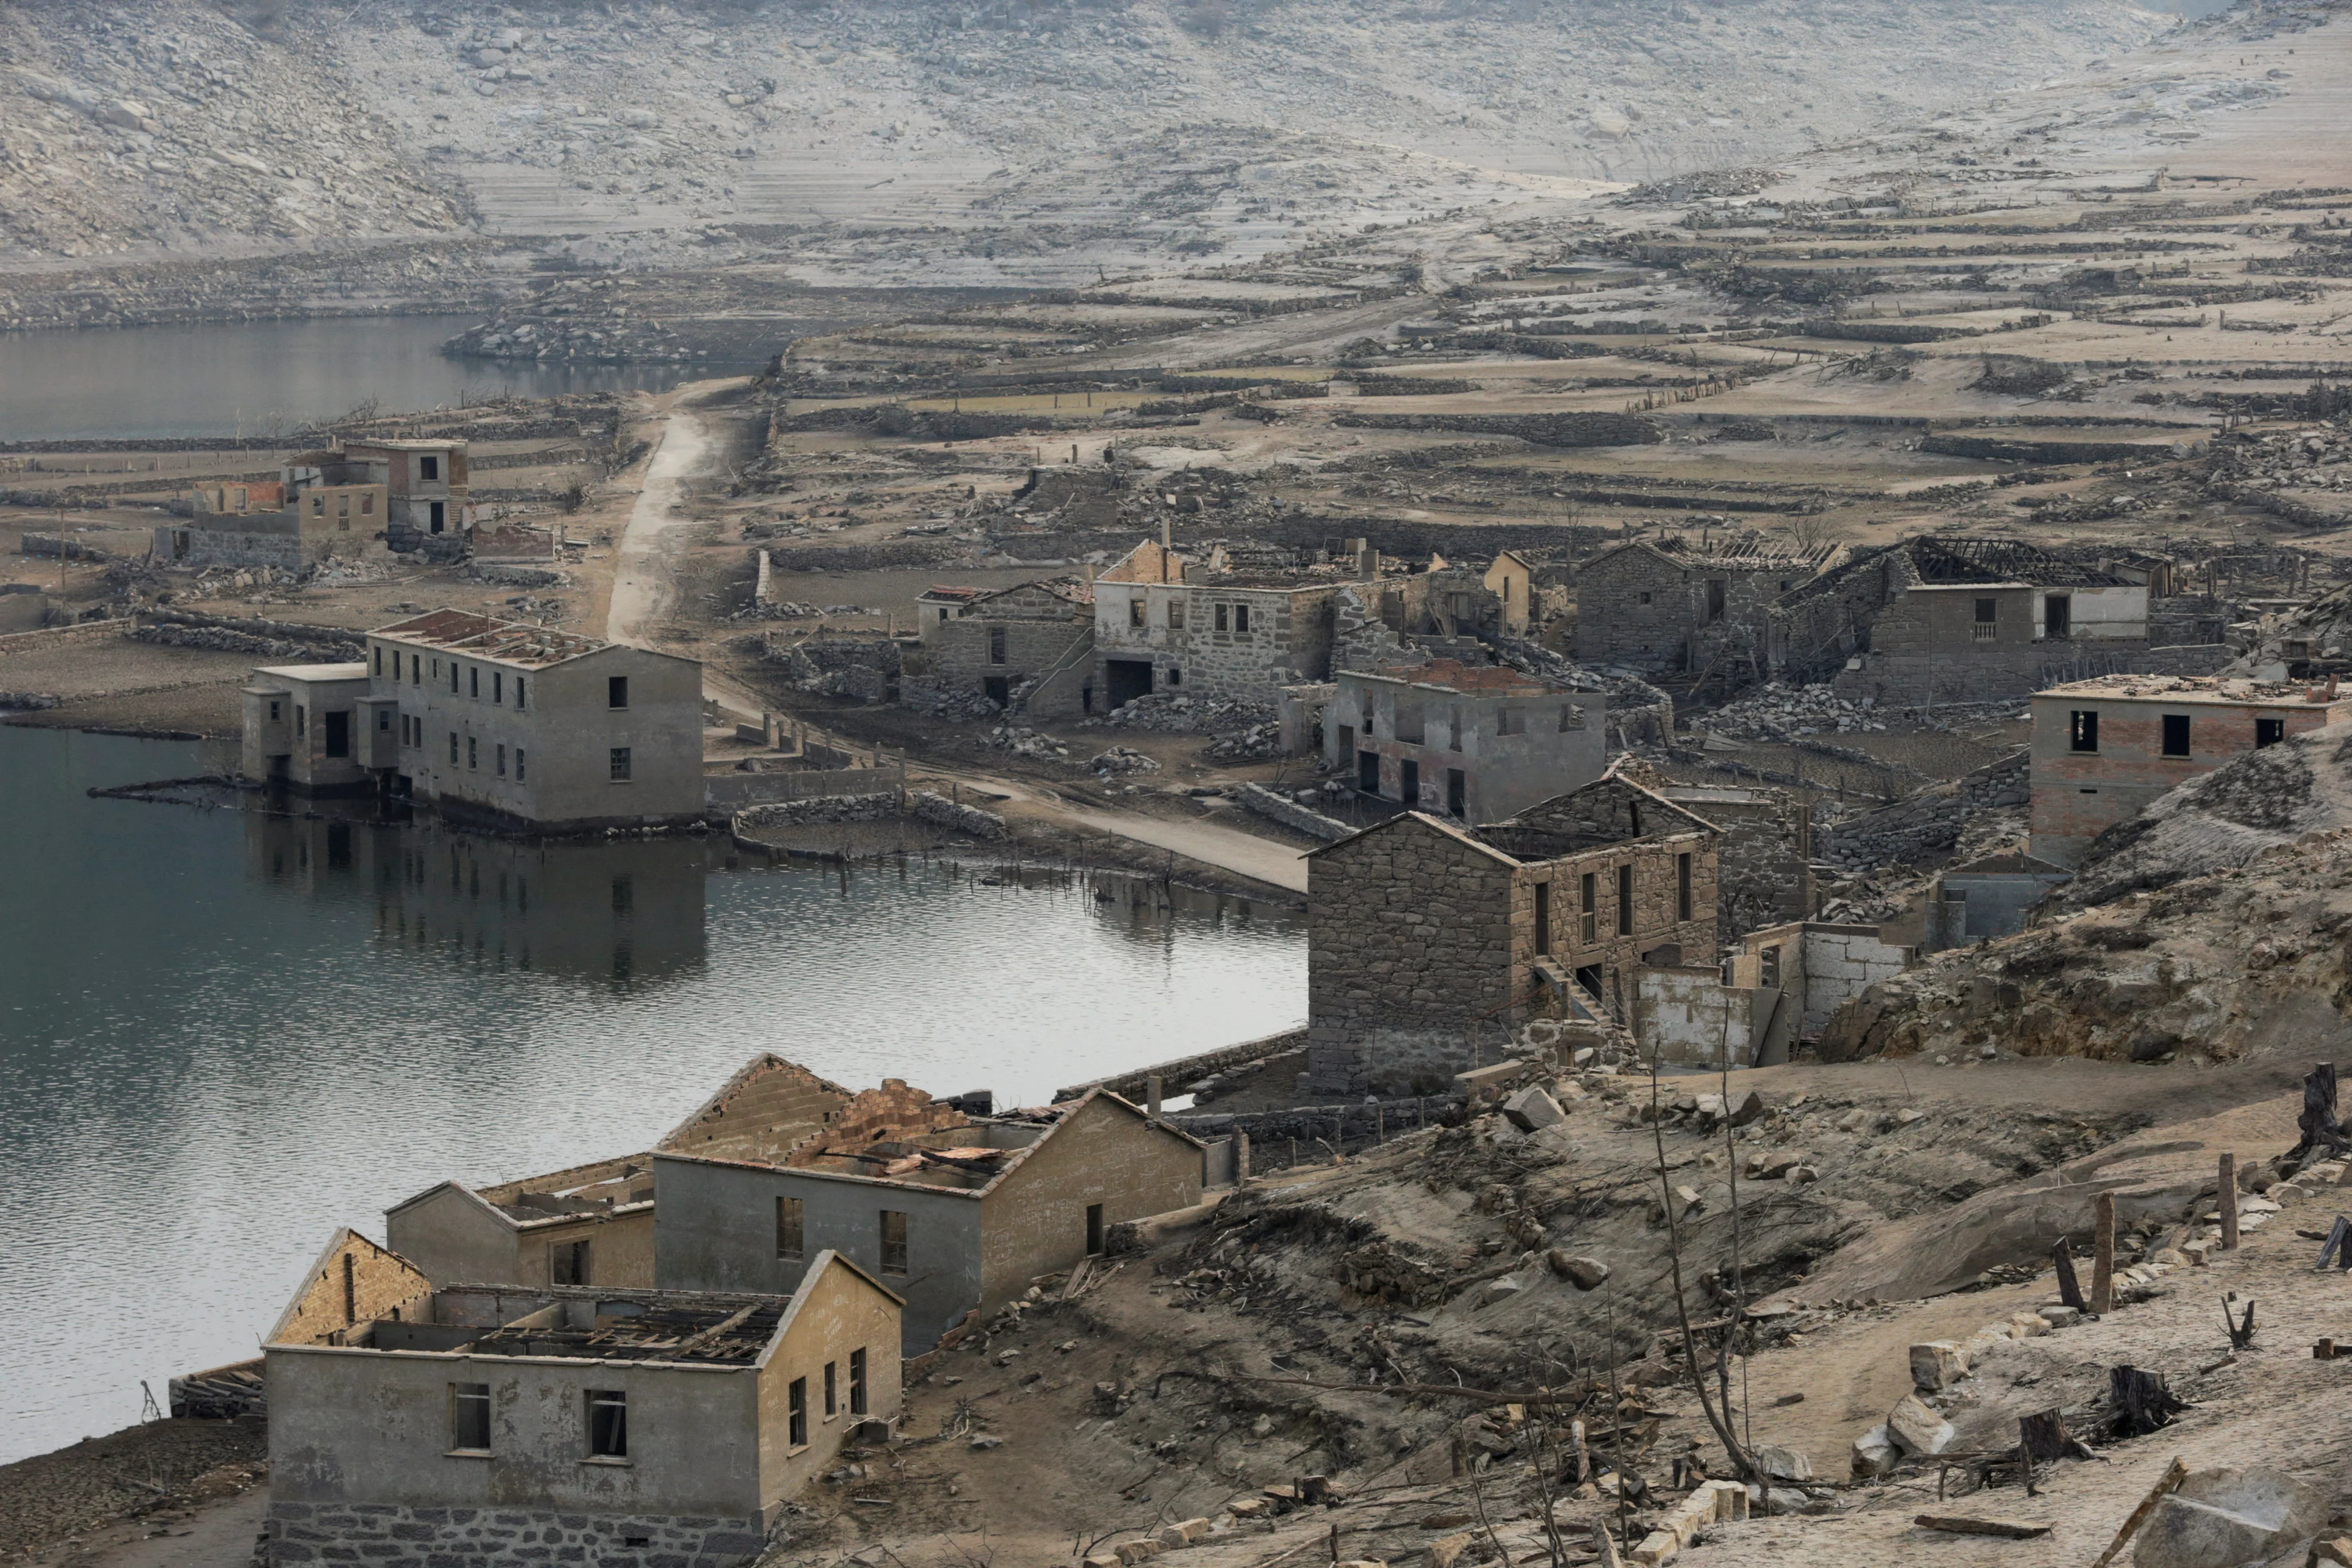 REUTERS: A general view shows the ancient village of Aceredo that had been submerged by Limia river in the 1990s after the dam was built in Concello de Lobios, Spain, February 10, 2022. REUTERS/Miguel Vidal